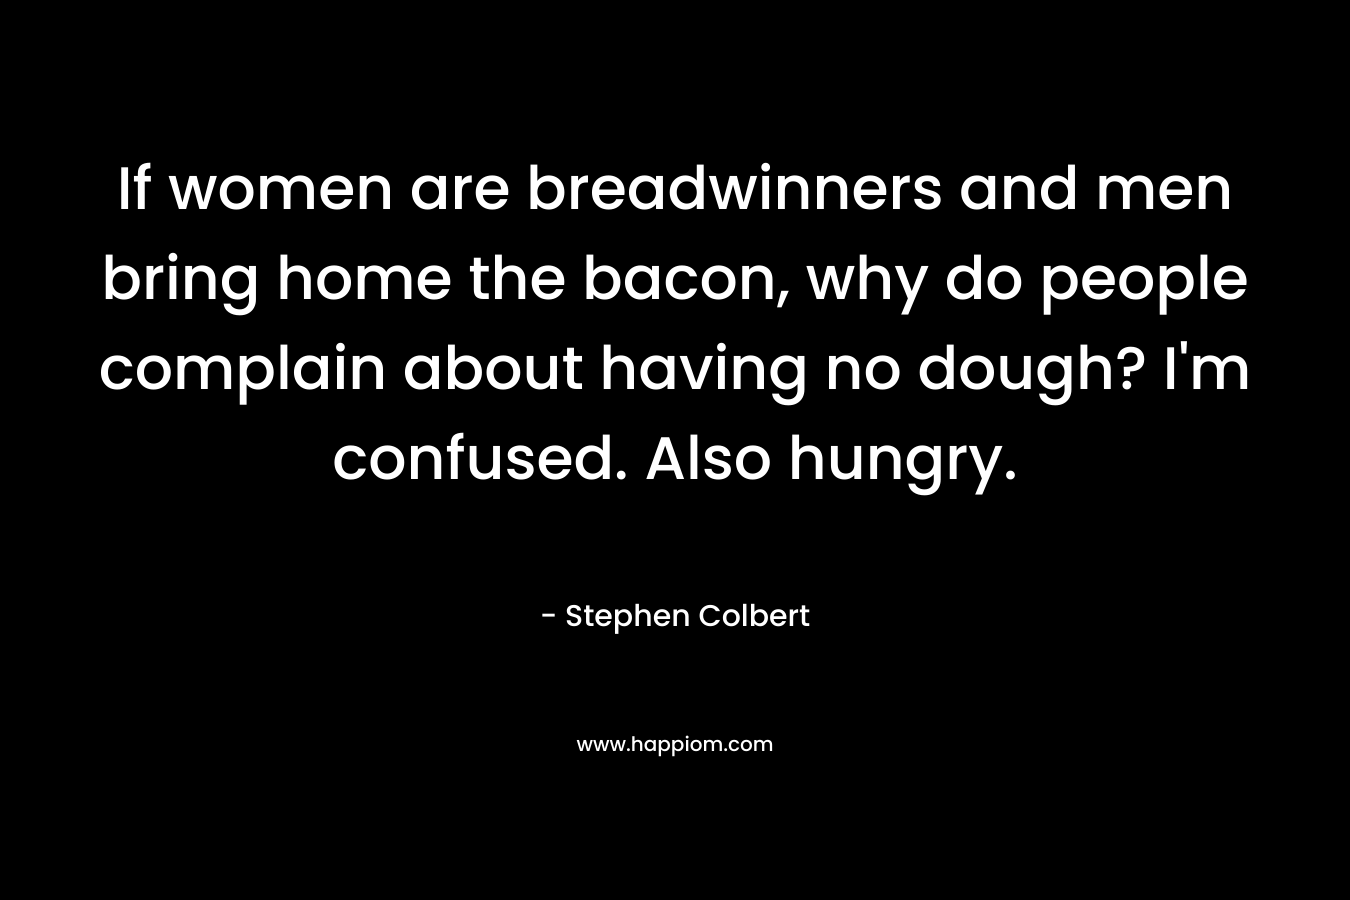 If women are breadwinners and men bring home the bacon, why do people complain about having no dough? I'm confused. Also hungry.